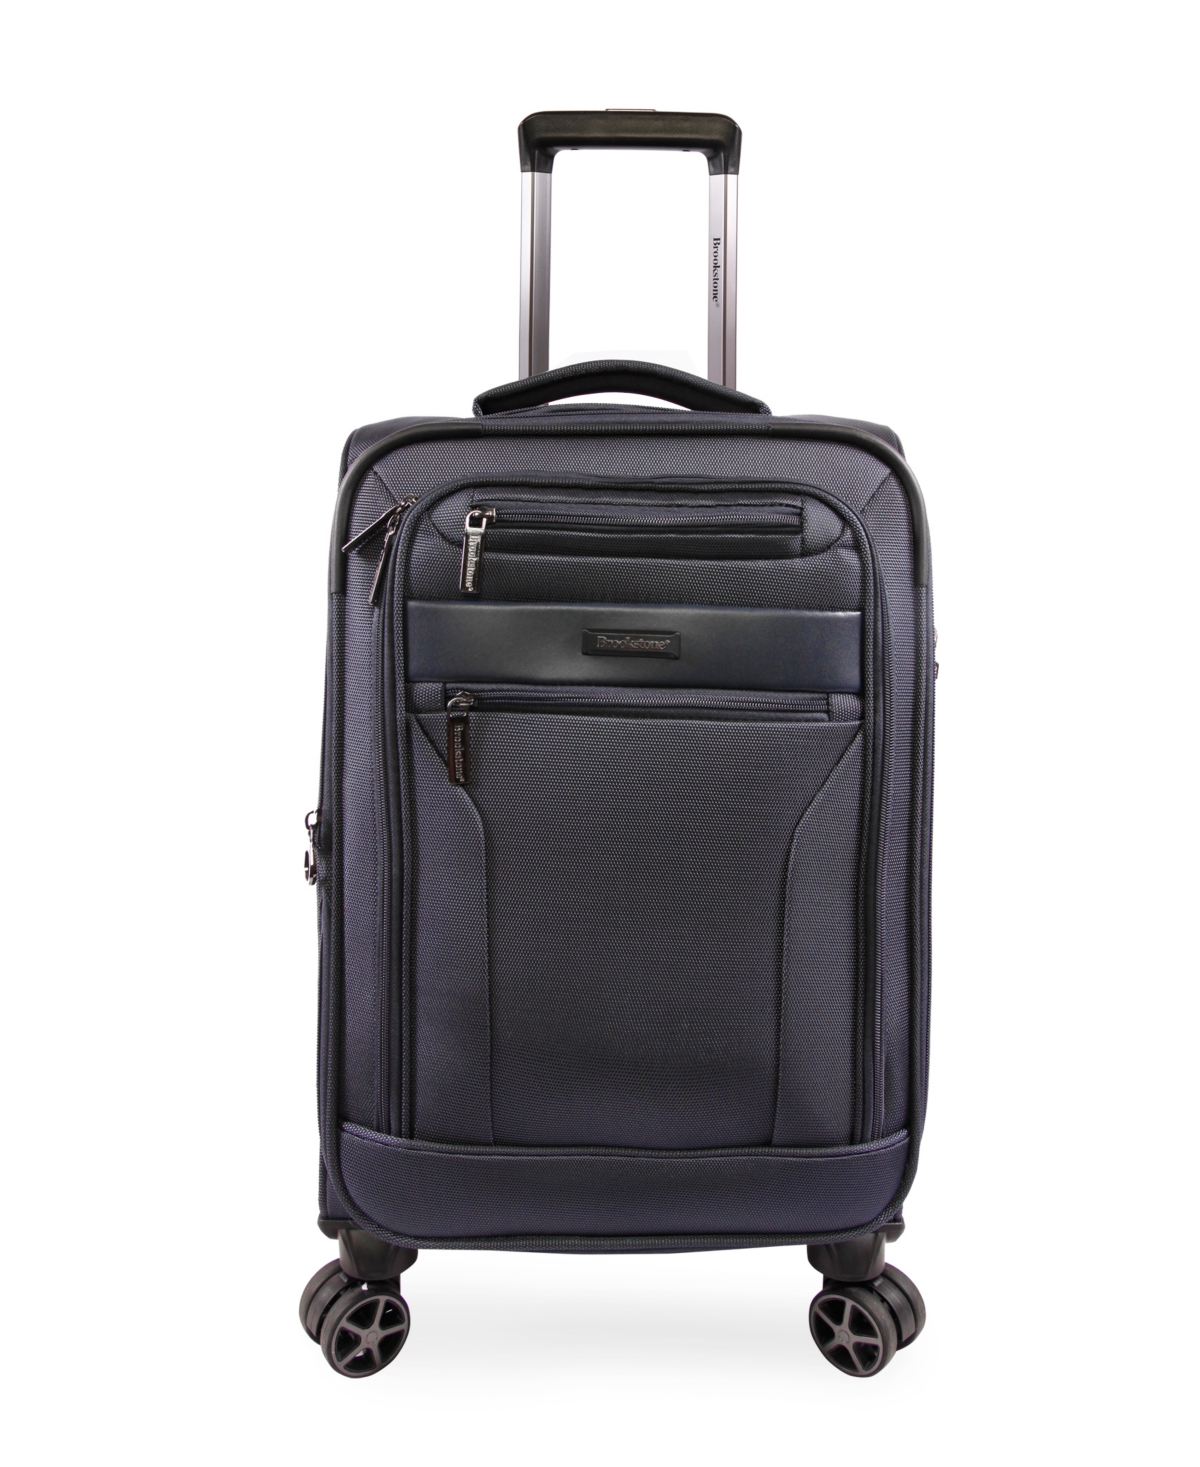 Harbor 21" Softside Carry-On Luggage with Charging Port - Navy